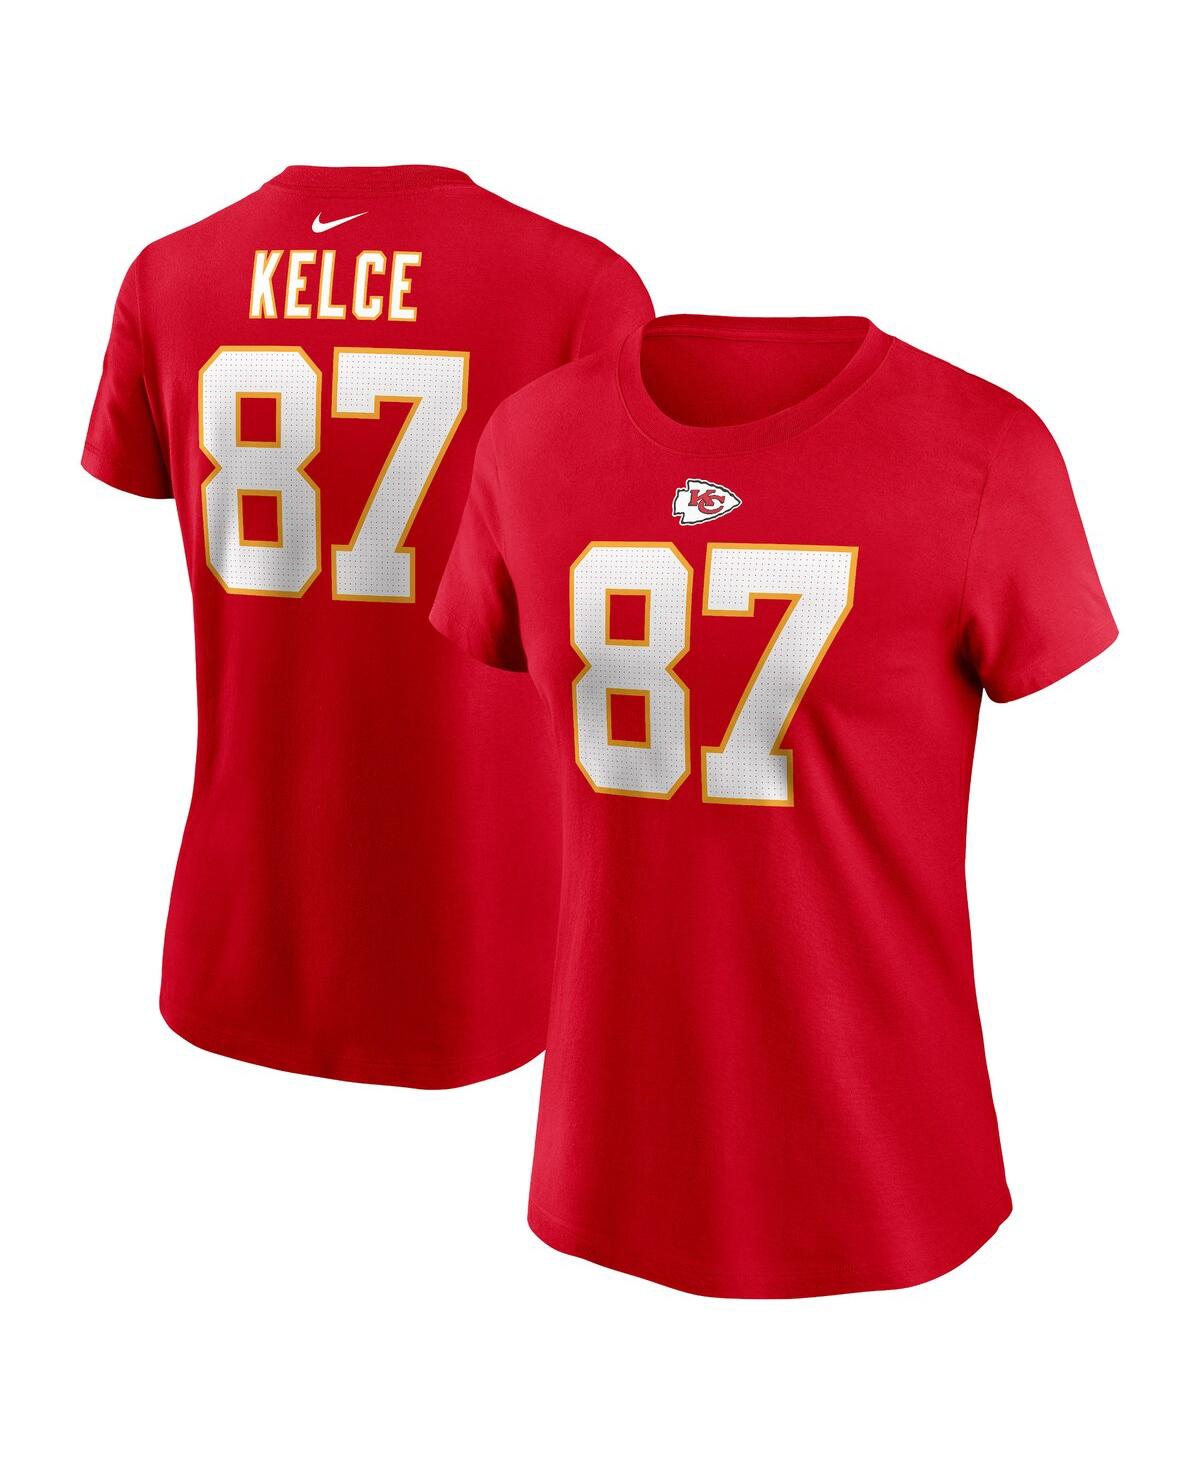 NIKE WOMEN'S NIKE TRAVIS KELCE RED KANSAS CITY CHIEFS PLAYER NAME AND NUMBER T-SHIRT